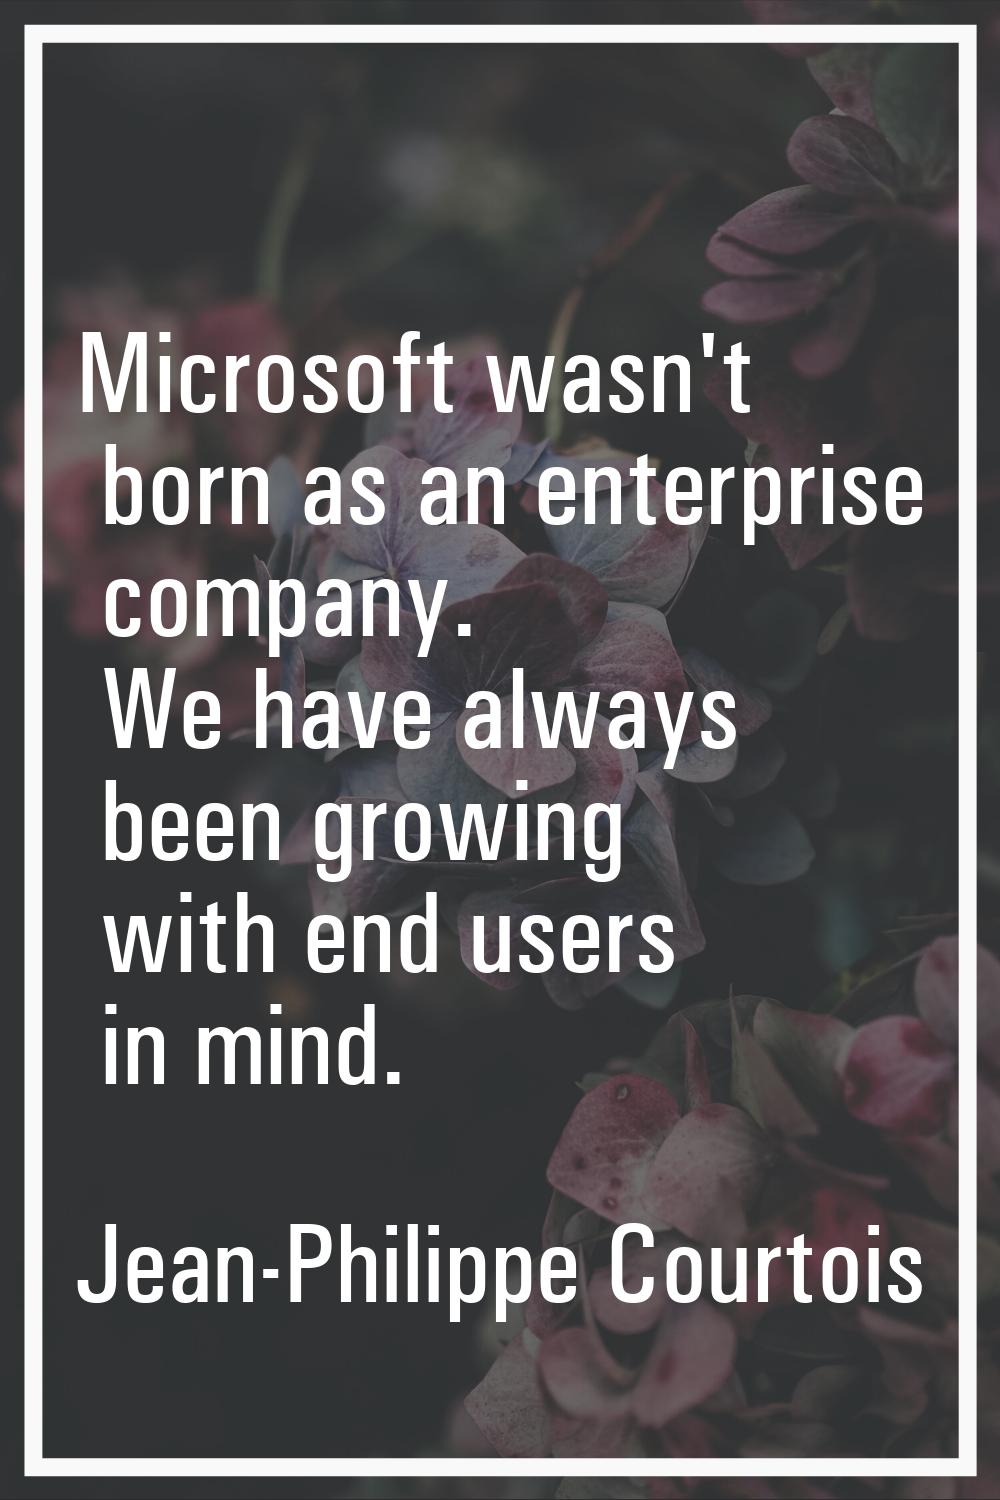 Microsoft wasn't born as an enterprise company. We have always been growing with end users in mind.